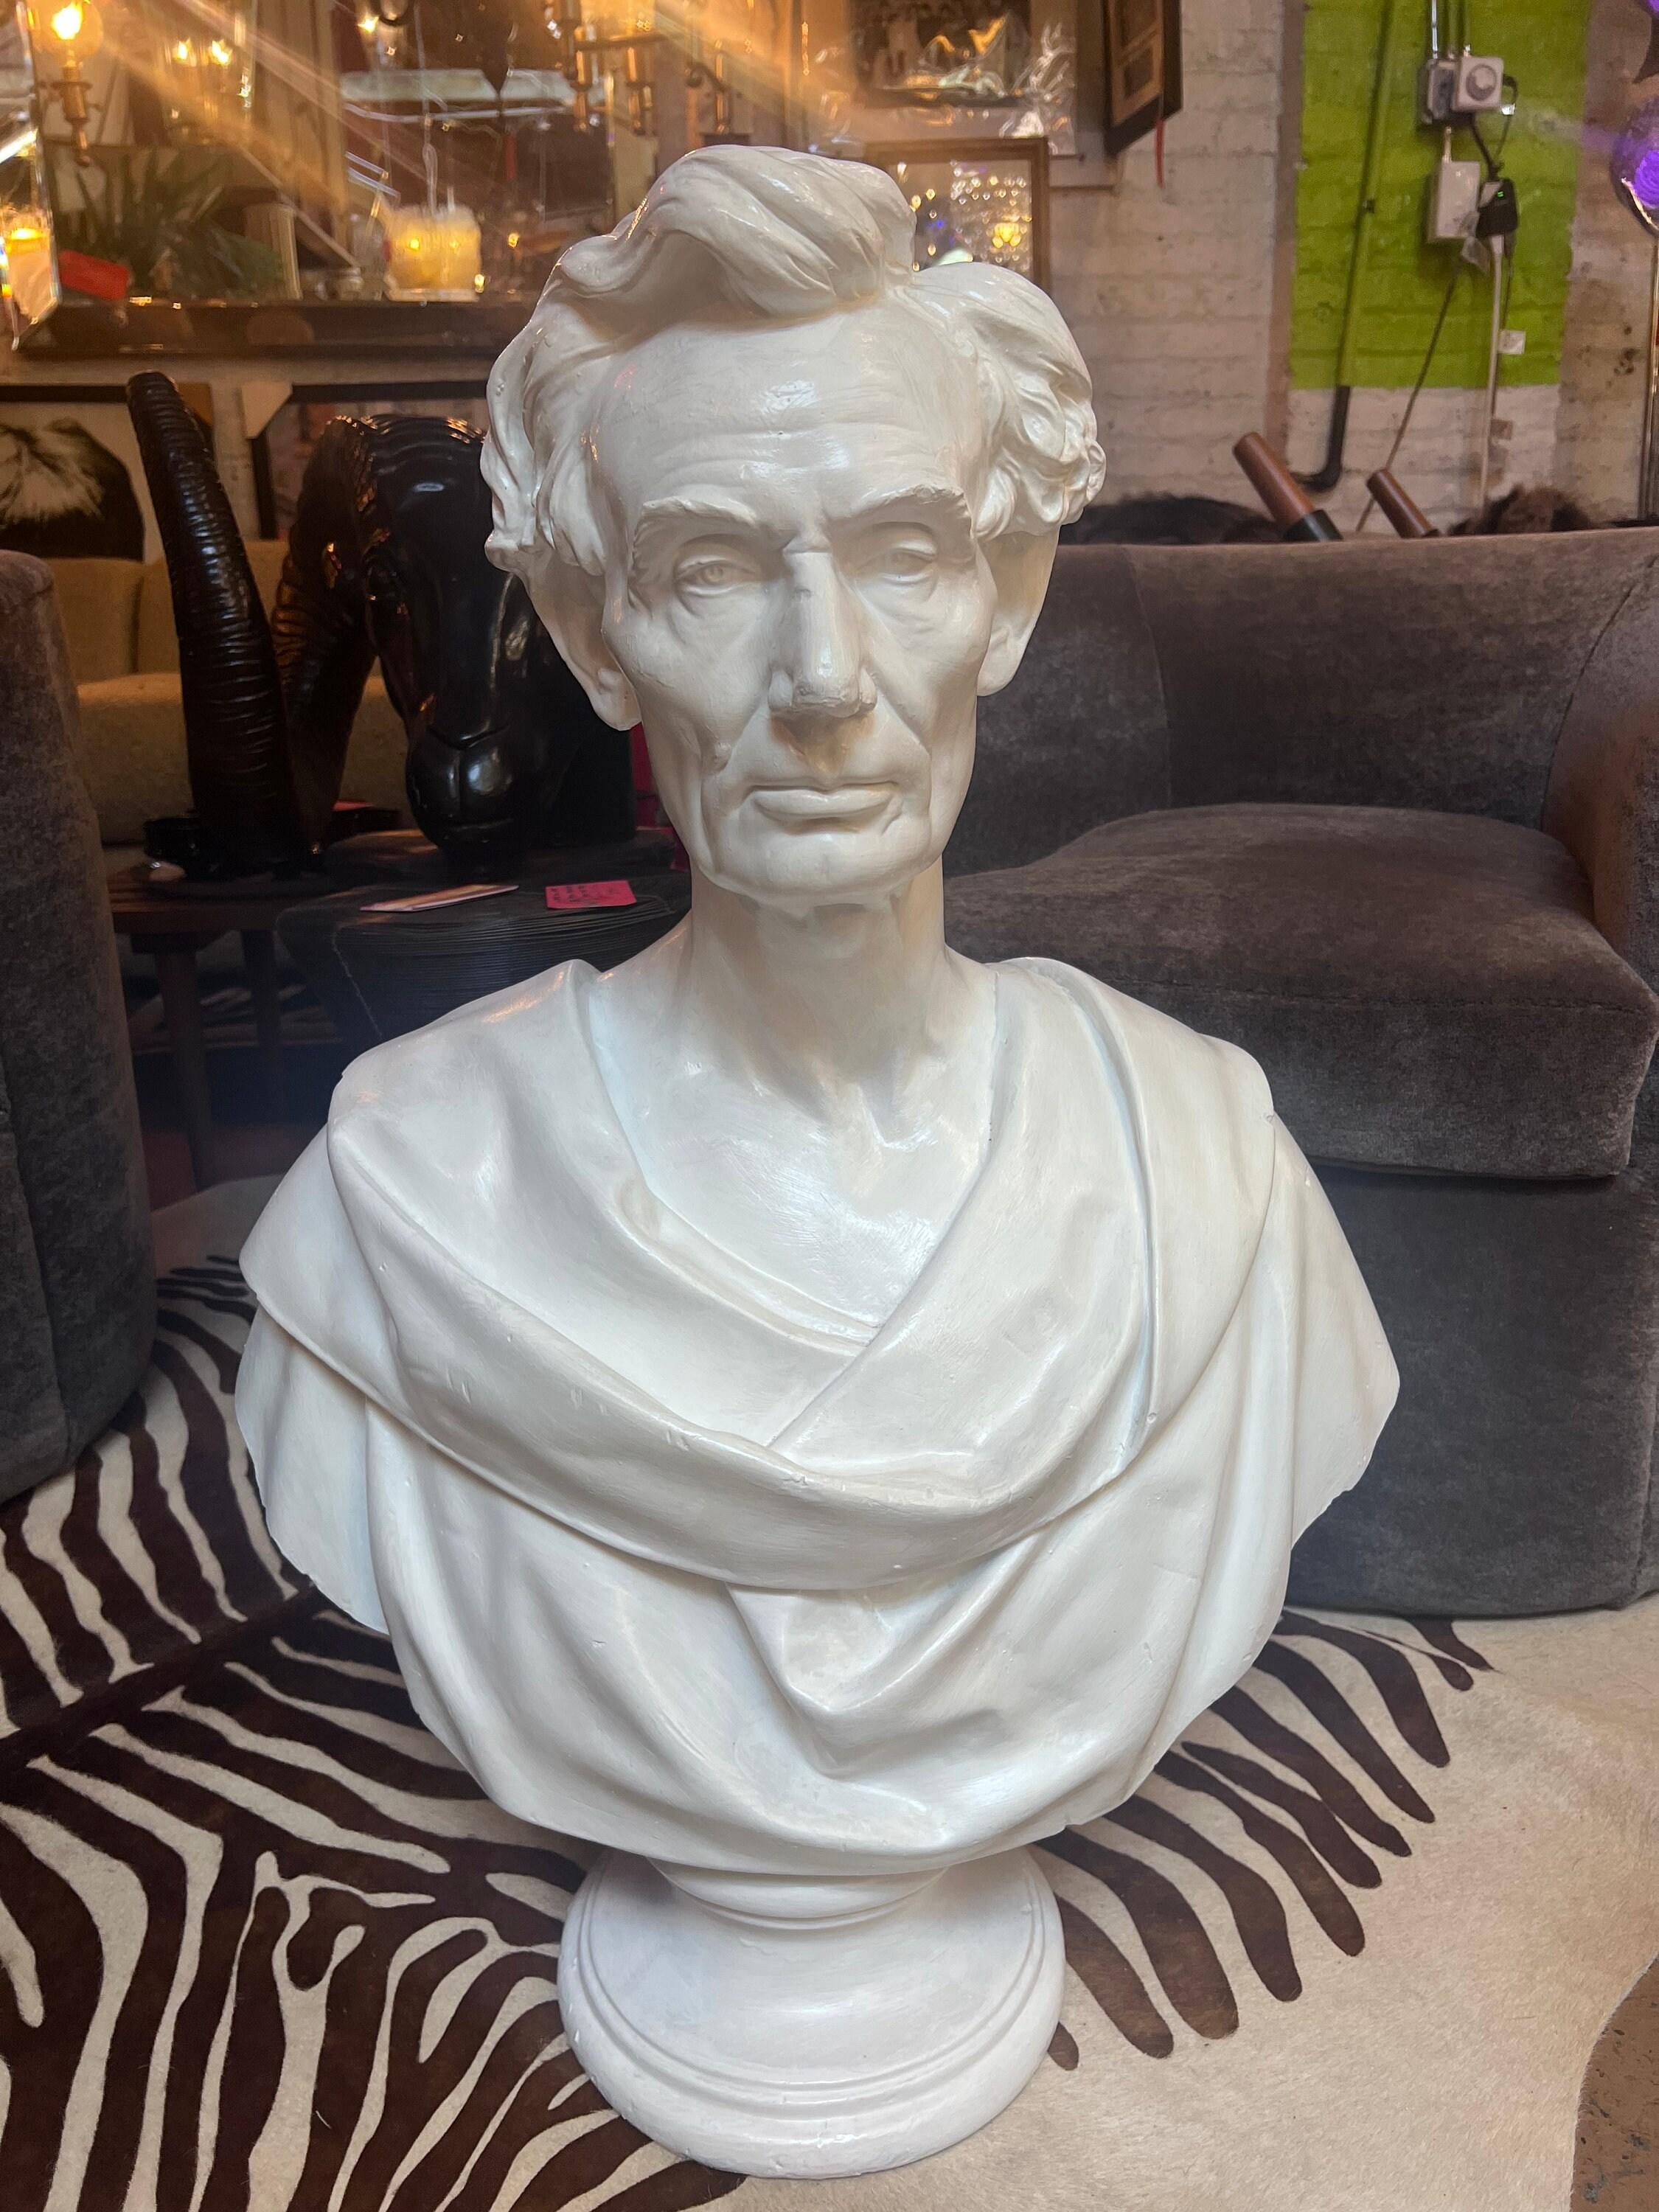 Leonard W. Volk Plaster Bust of Abraham Lincoln

The Leonard W. Volk Plaster Bust of Abraham Lincoln is a remarkable piece of art. Crafted from white plaster, the bust depicts Abraham Lincoln in a style reminiscent of ancient Rome, wearing drapery,